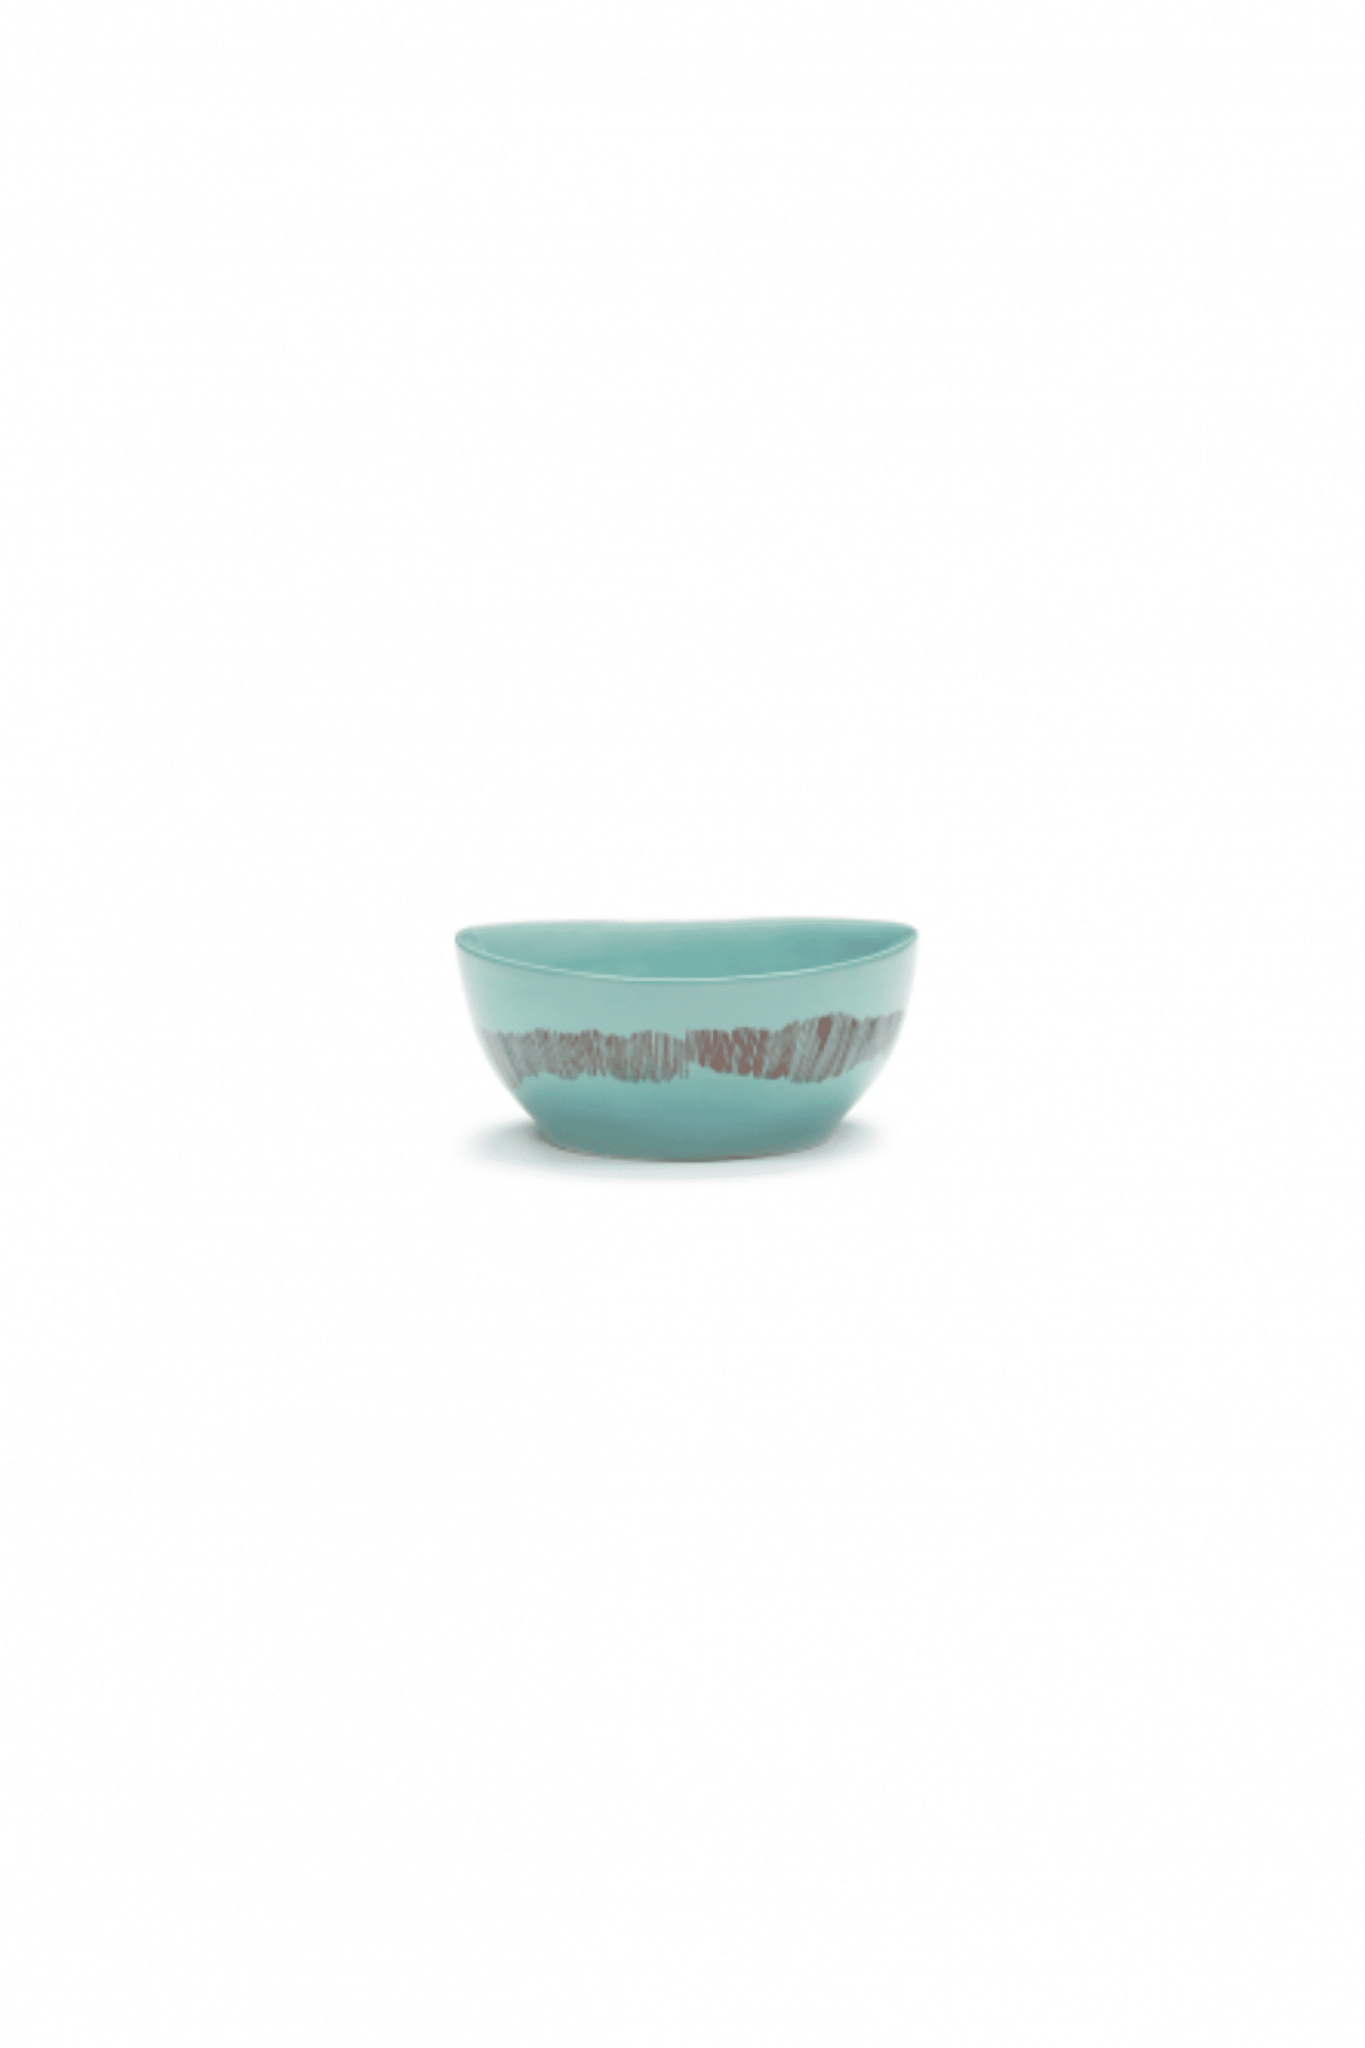 Small Bowl, Azure Swirl with Red Stripes Ottolenghi Serax, front view